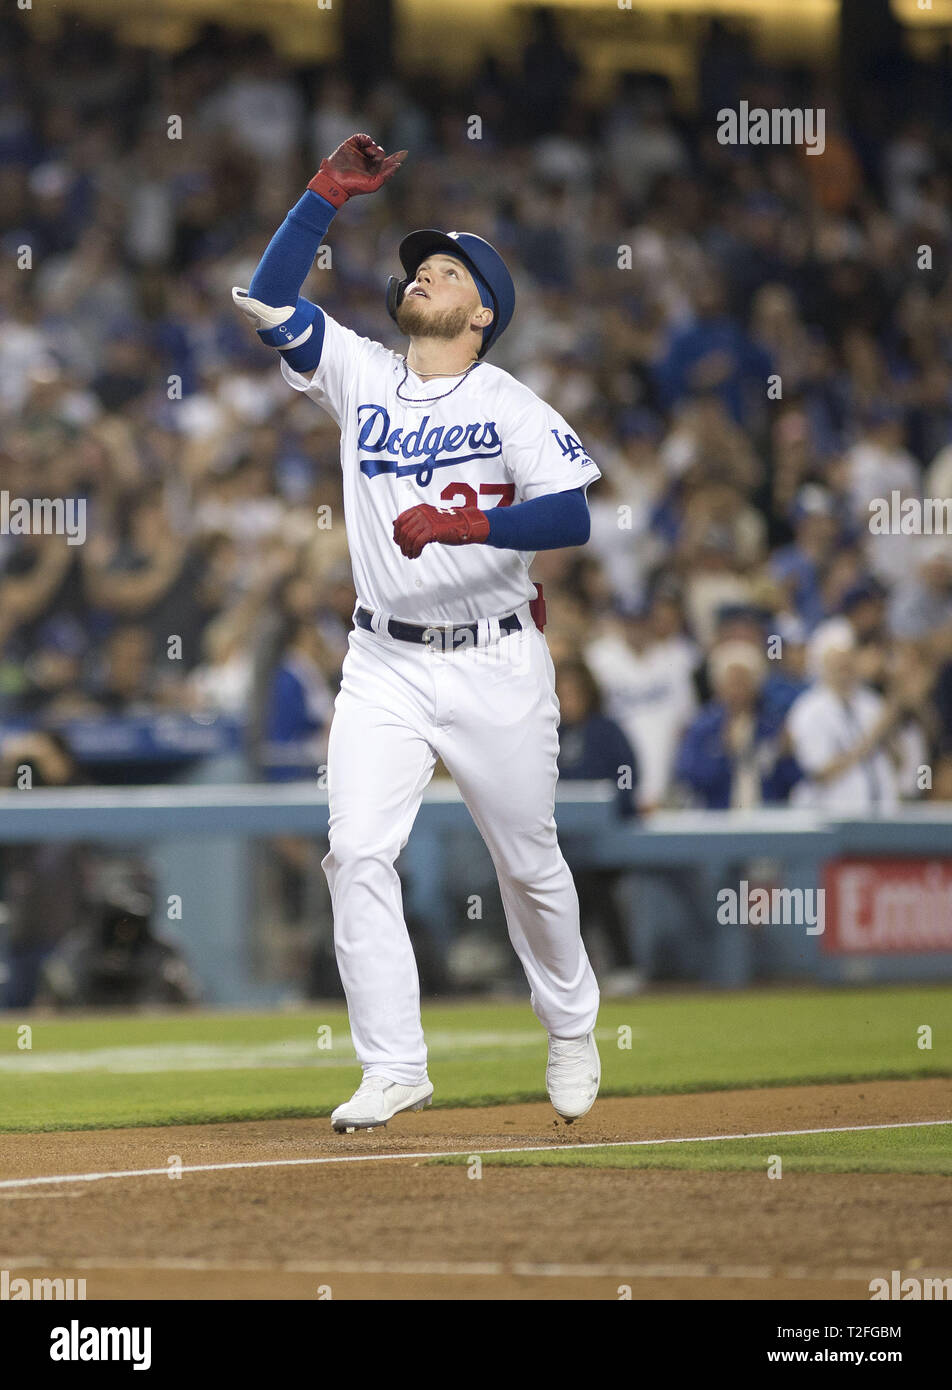 Dodgers postgame: Alex Verdugo reacts to fans singing happy birthday during  game at Dodger Stadium 